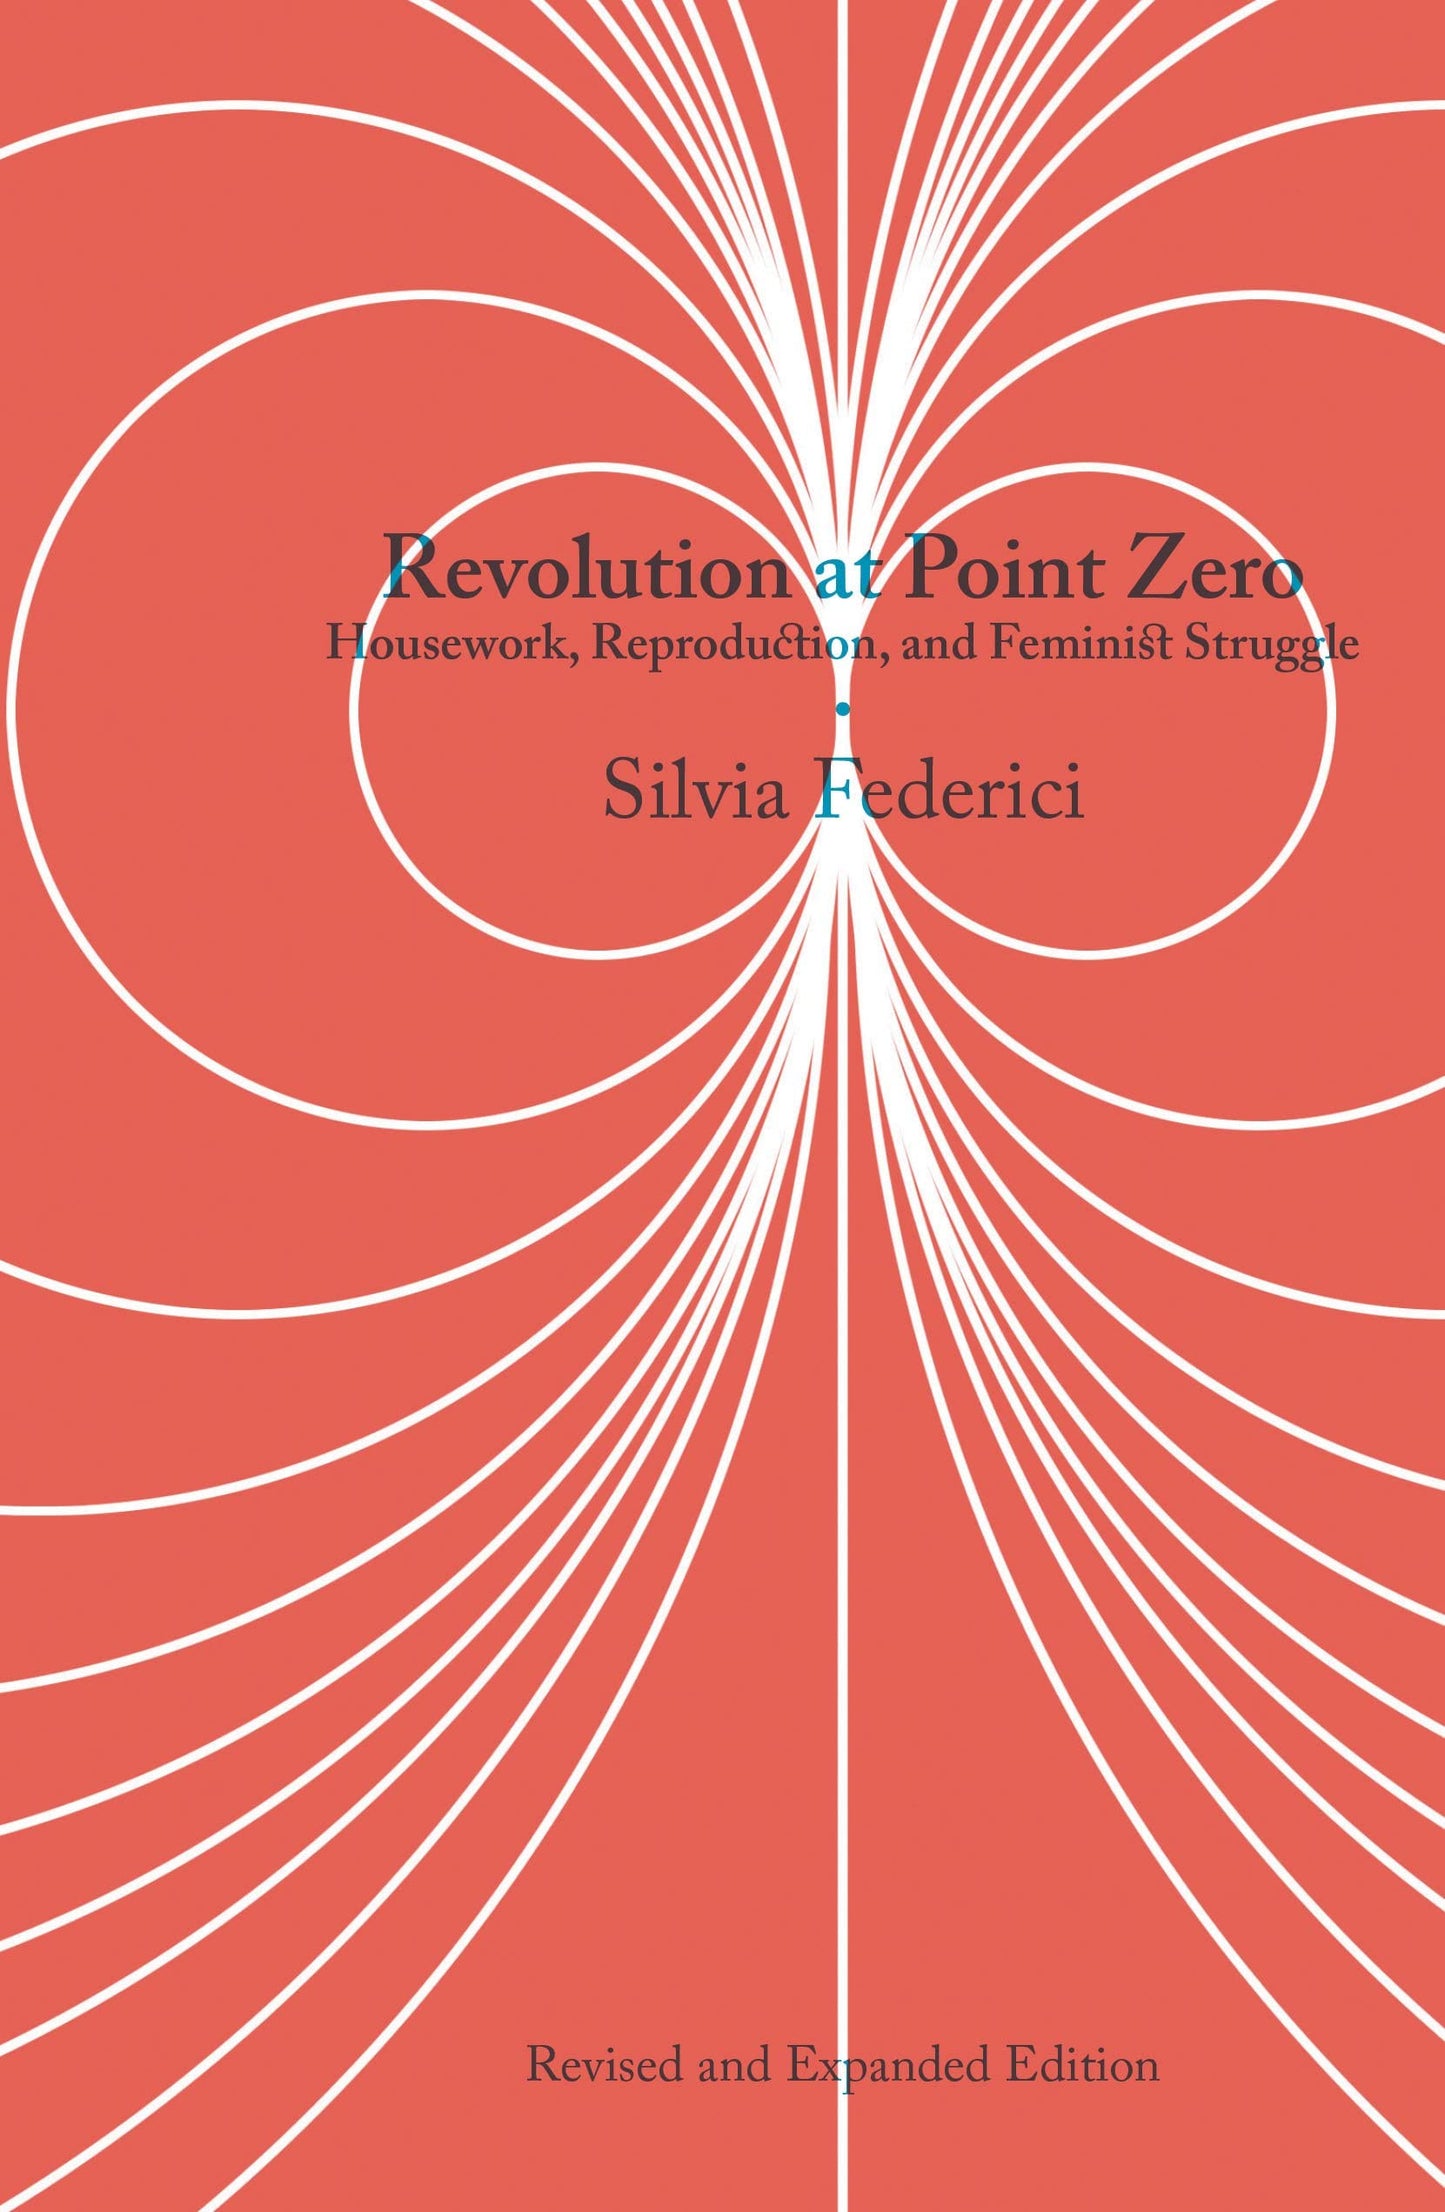 Revolution at Point Zero, by Sylvia Federici